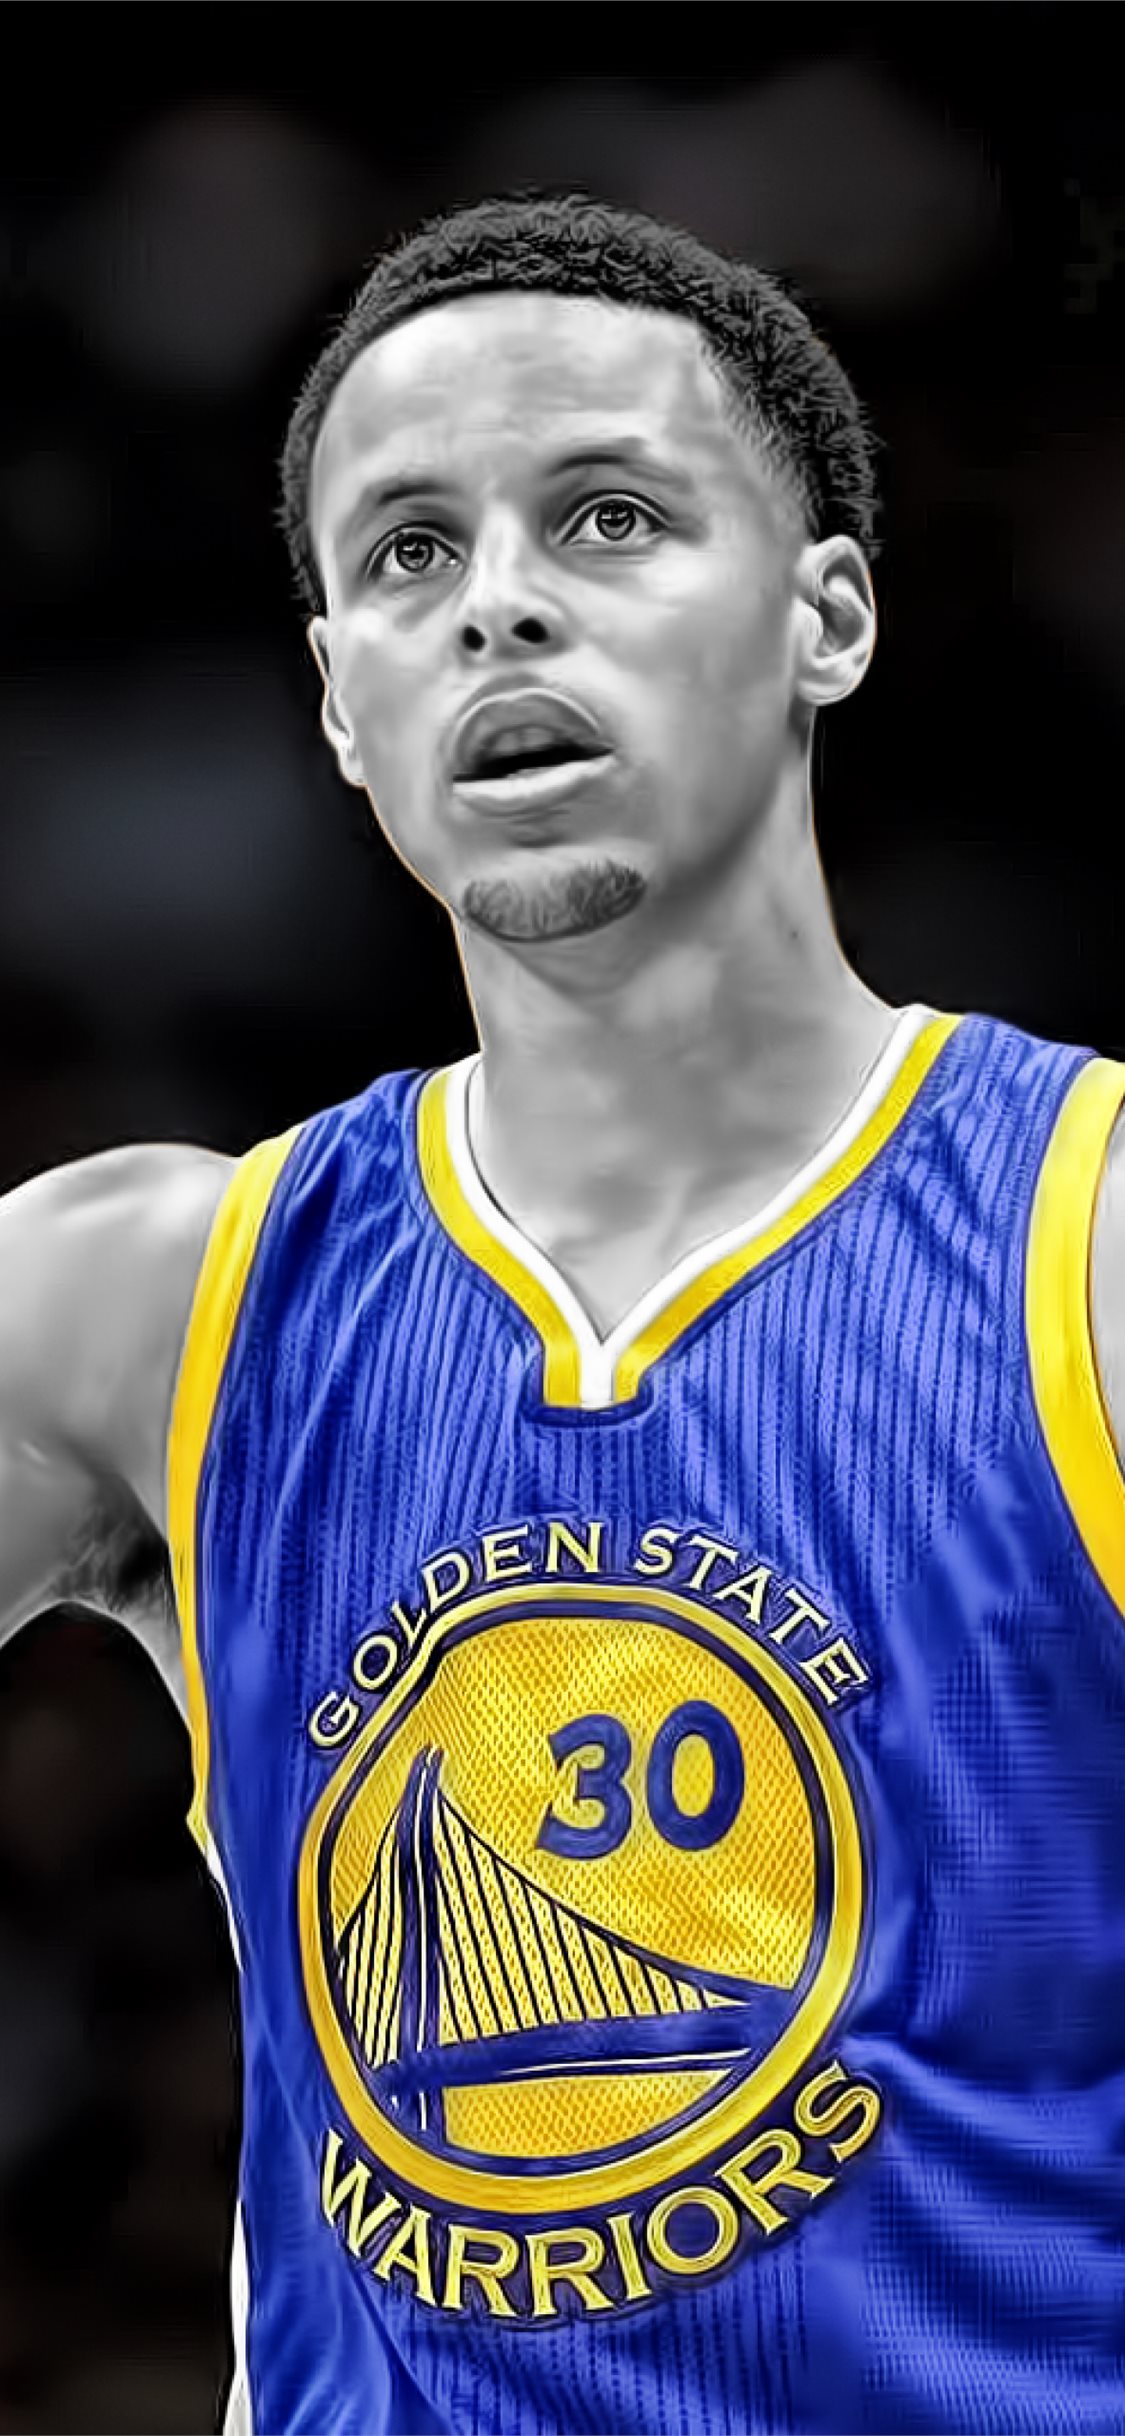 Stephen Curry iPhone 11 Wallpapers Free Download